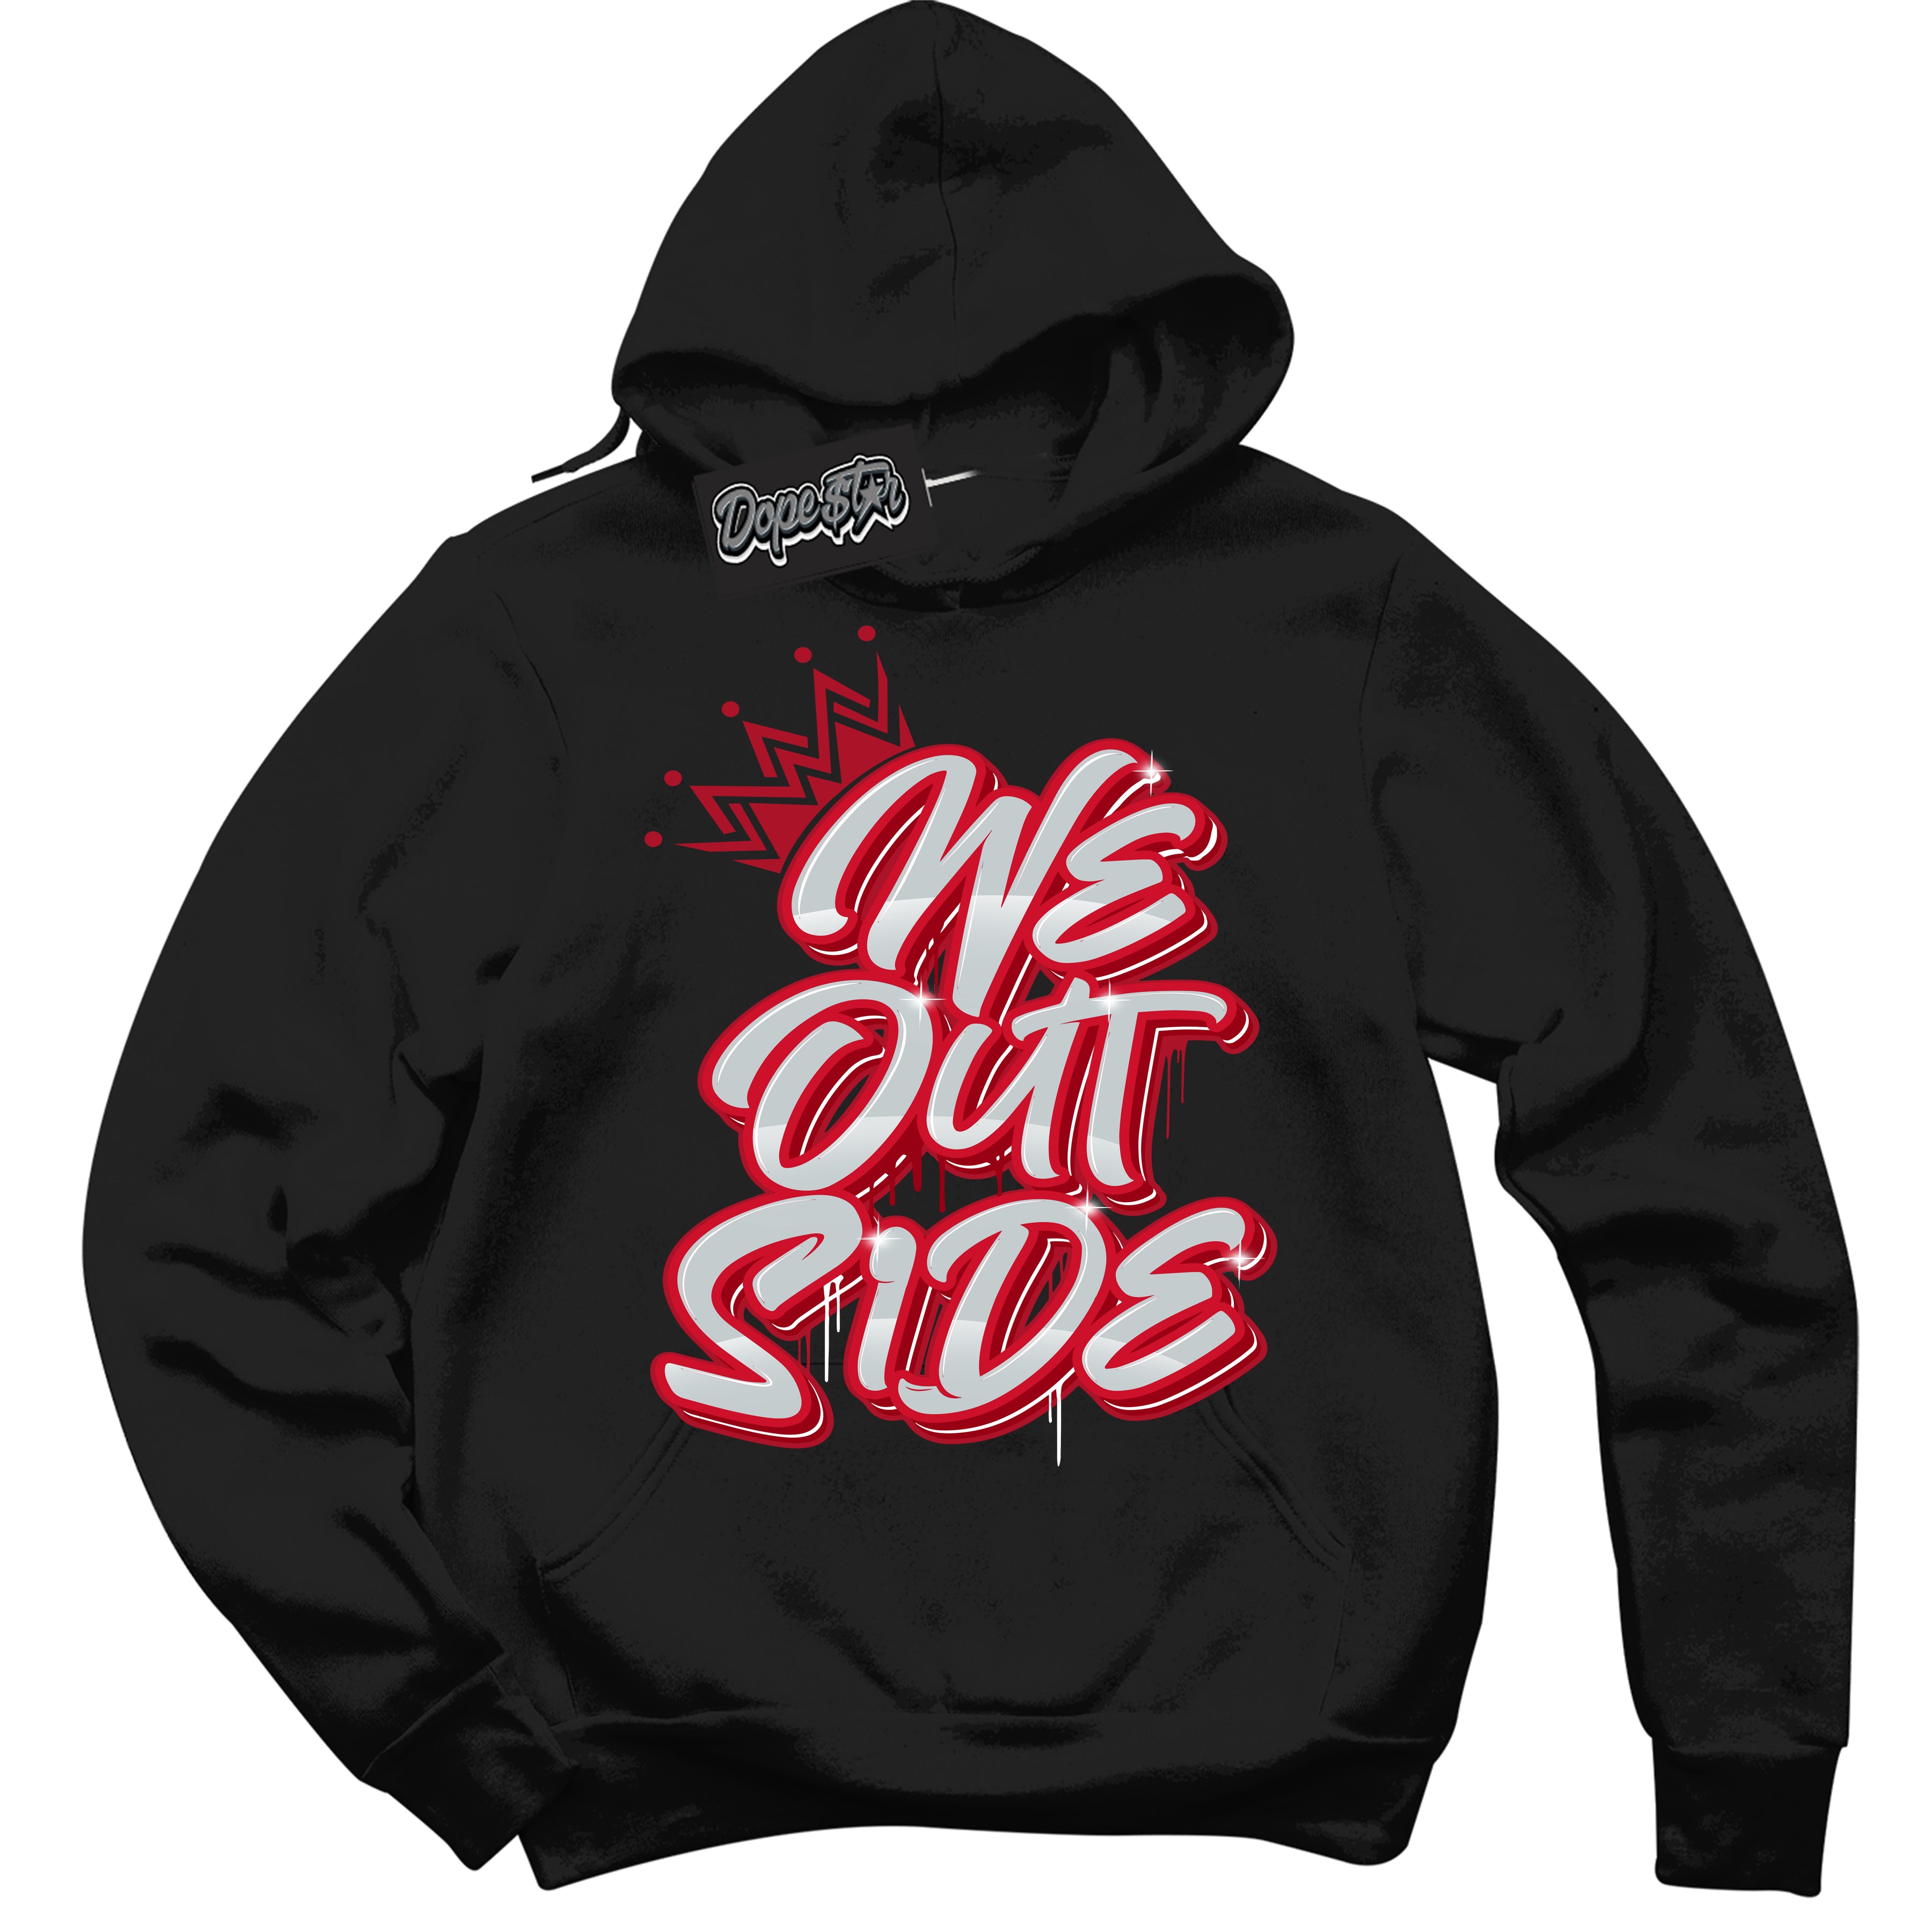 Cool Black Hoodie with “ We Outside ”  design that Perfectly Matches  Reverse Ultraman Sneakers.